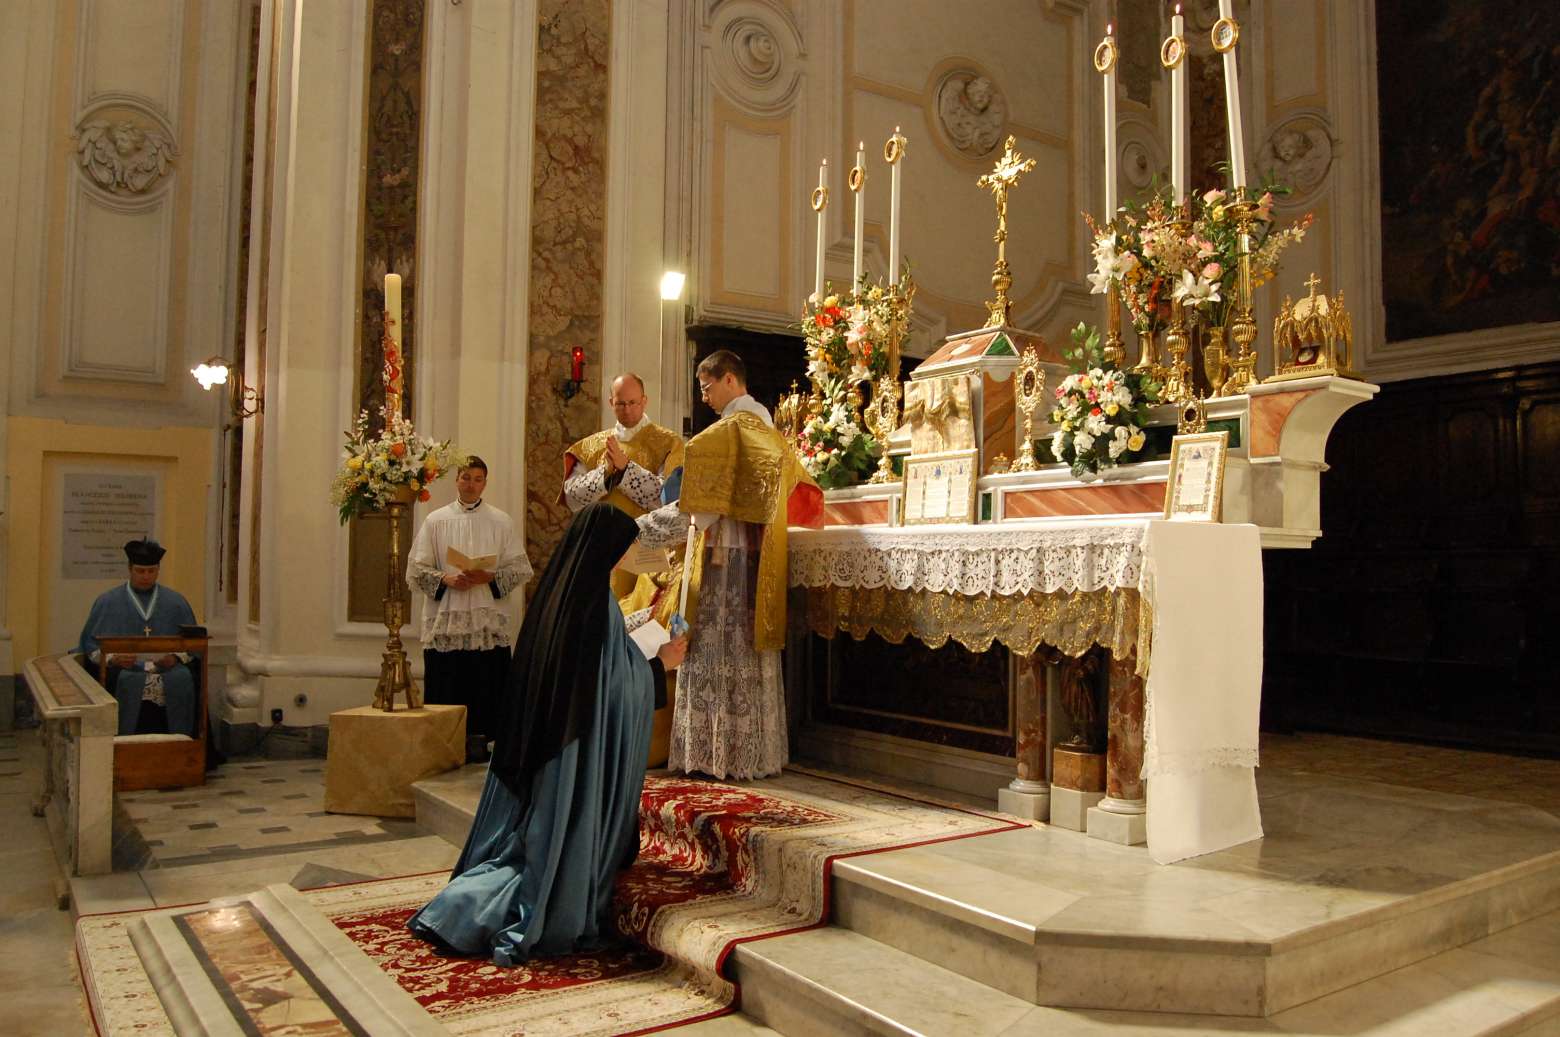 News from Our Sister Adorers: Renewal of Vows in Naples